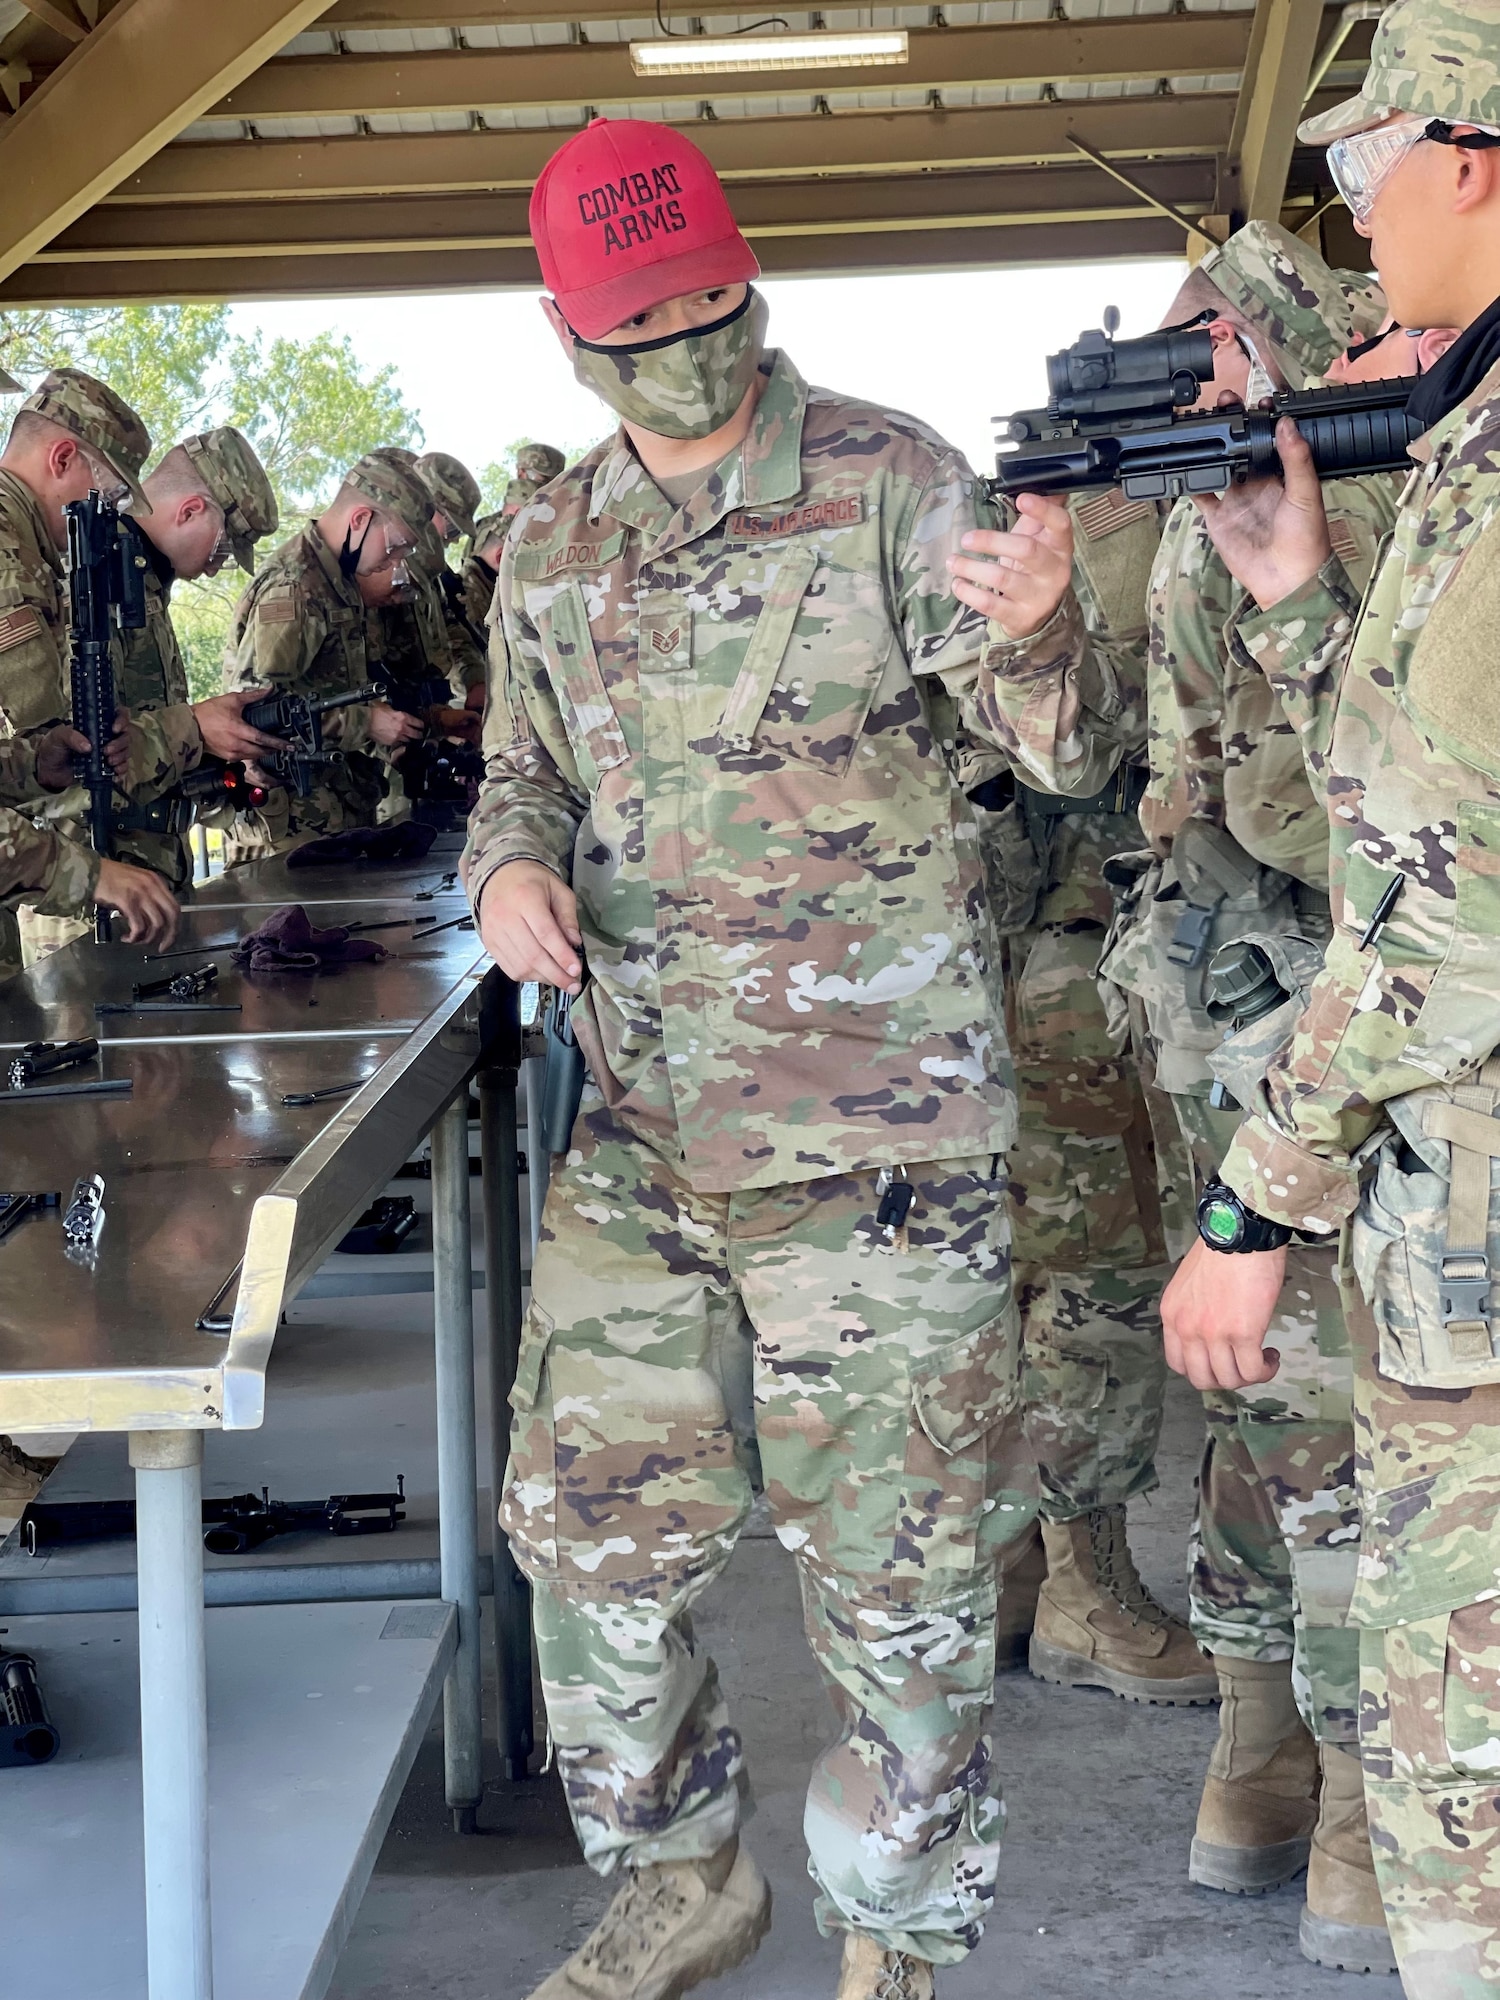 CATM instructor inspects trainees' weapons